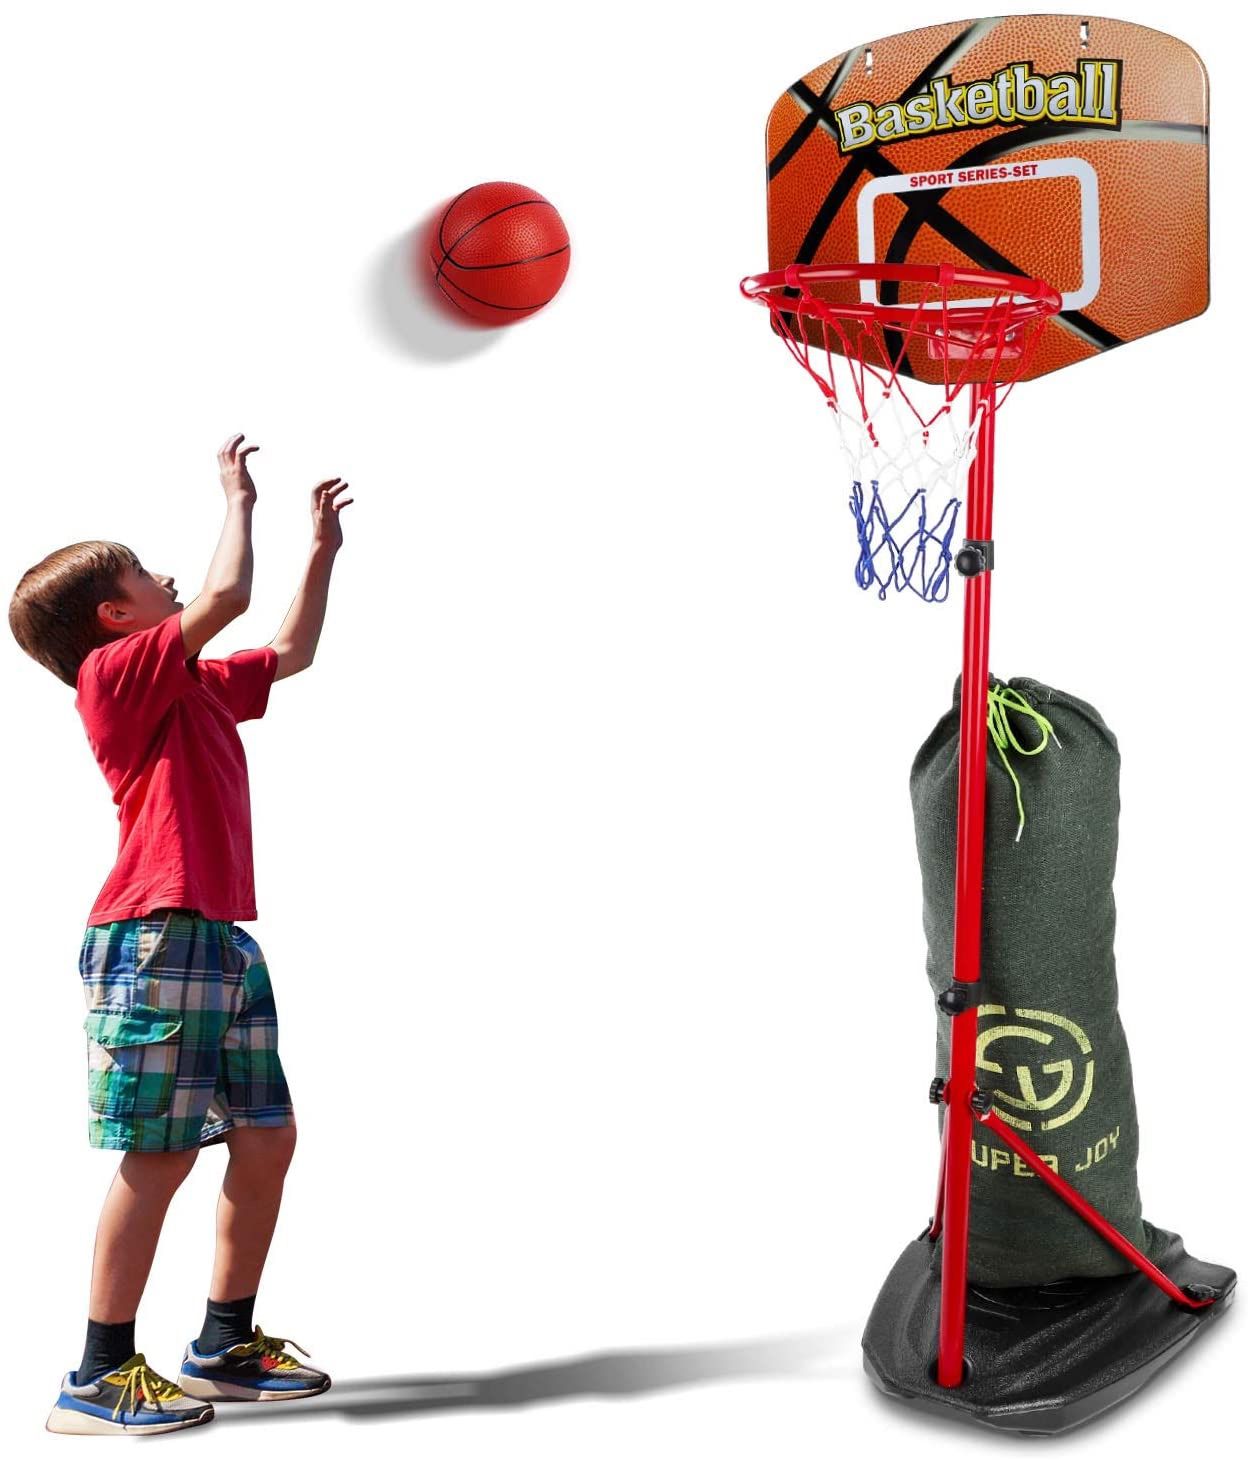 Basketball Hoop for Kids Adjustable Height 2.85-6.23 ft, Portable Mini Kids Basketball Stand Indoor and Outdoor, Sport Games for Boys and Girls Age 3